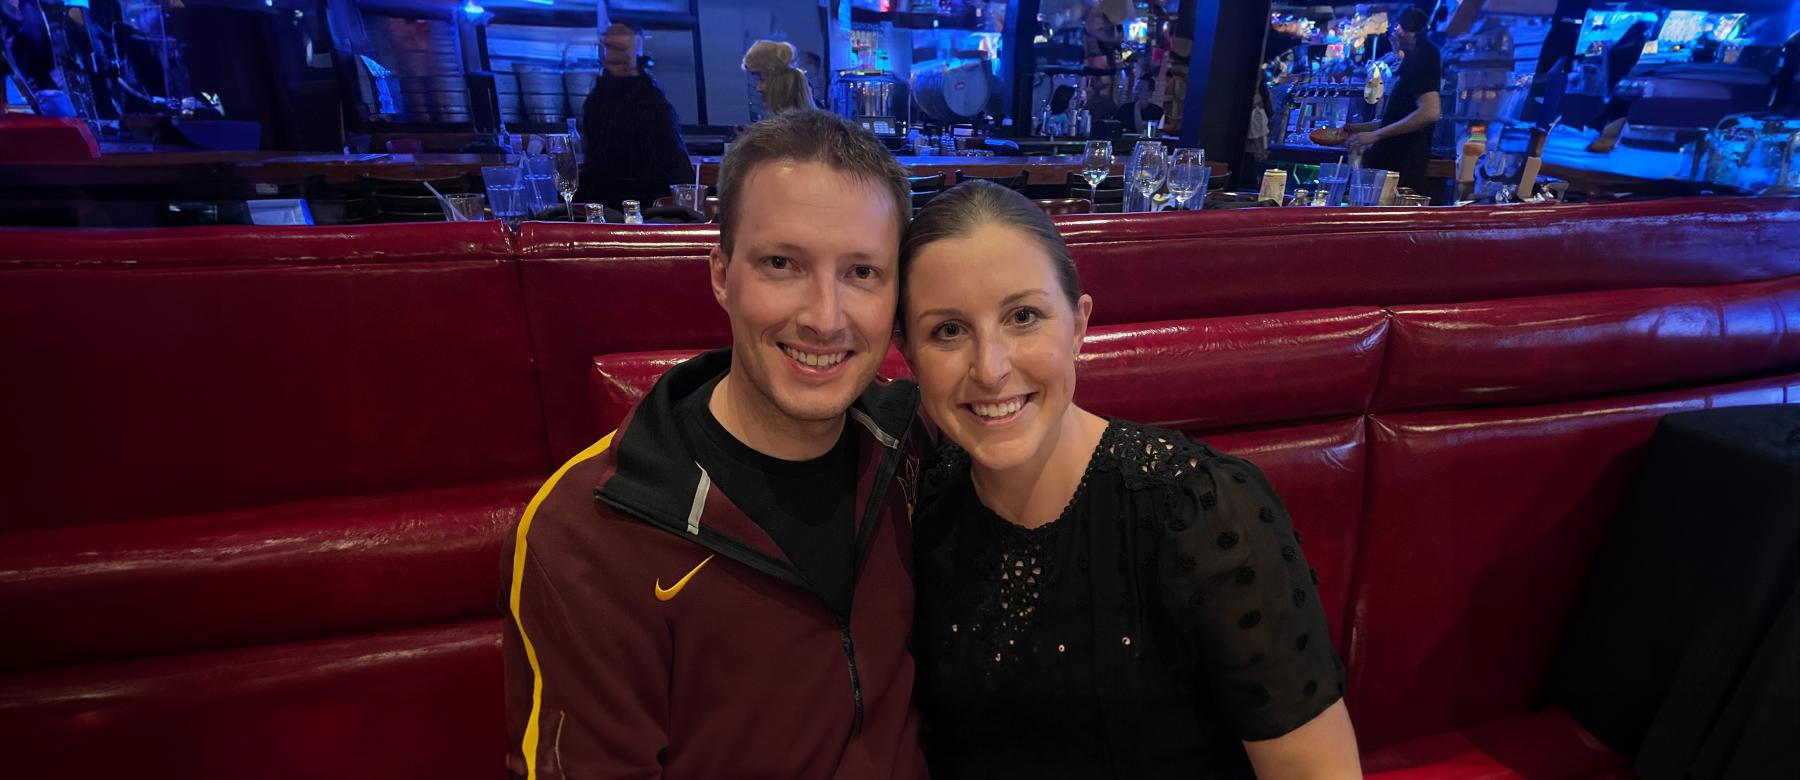 Kelly Weber Felch and her husband Ryan Felch, smiling and sitting at a maroon booth at a wood table